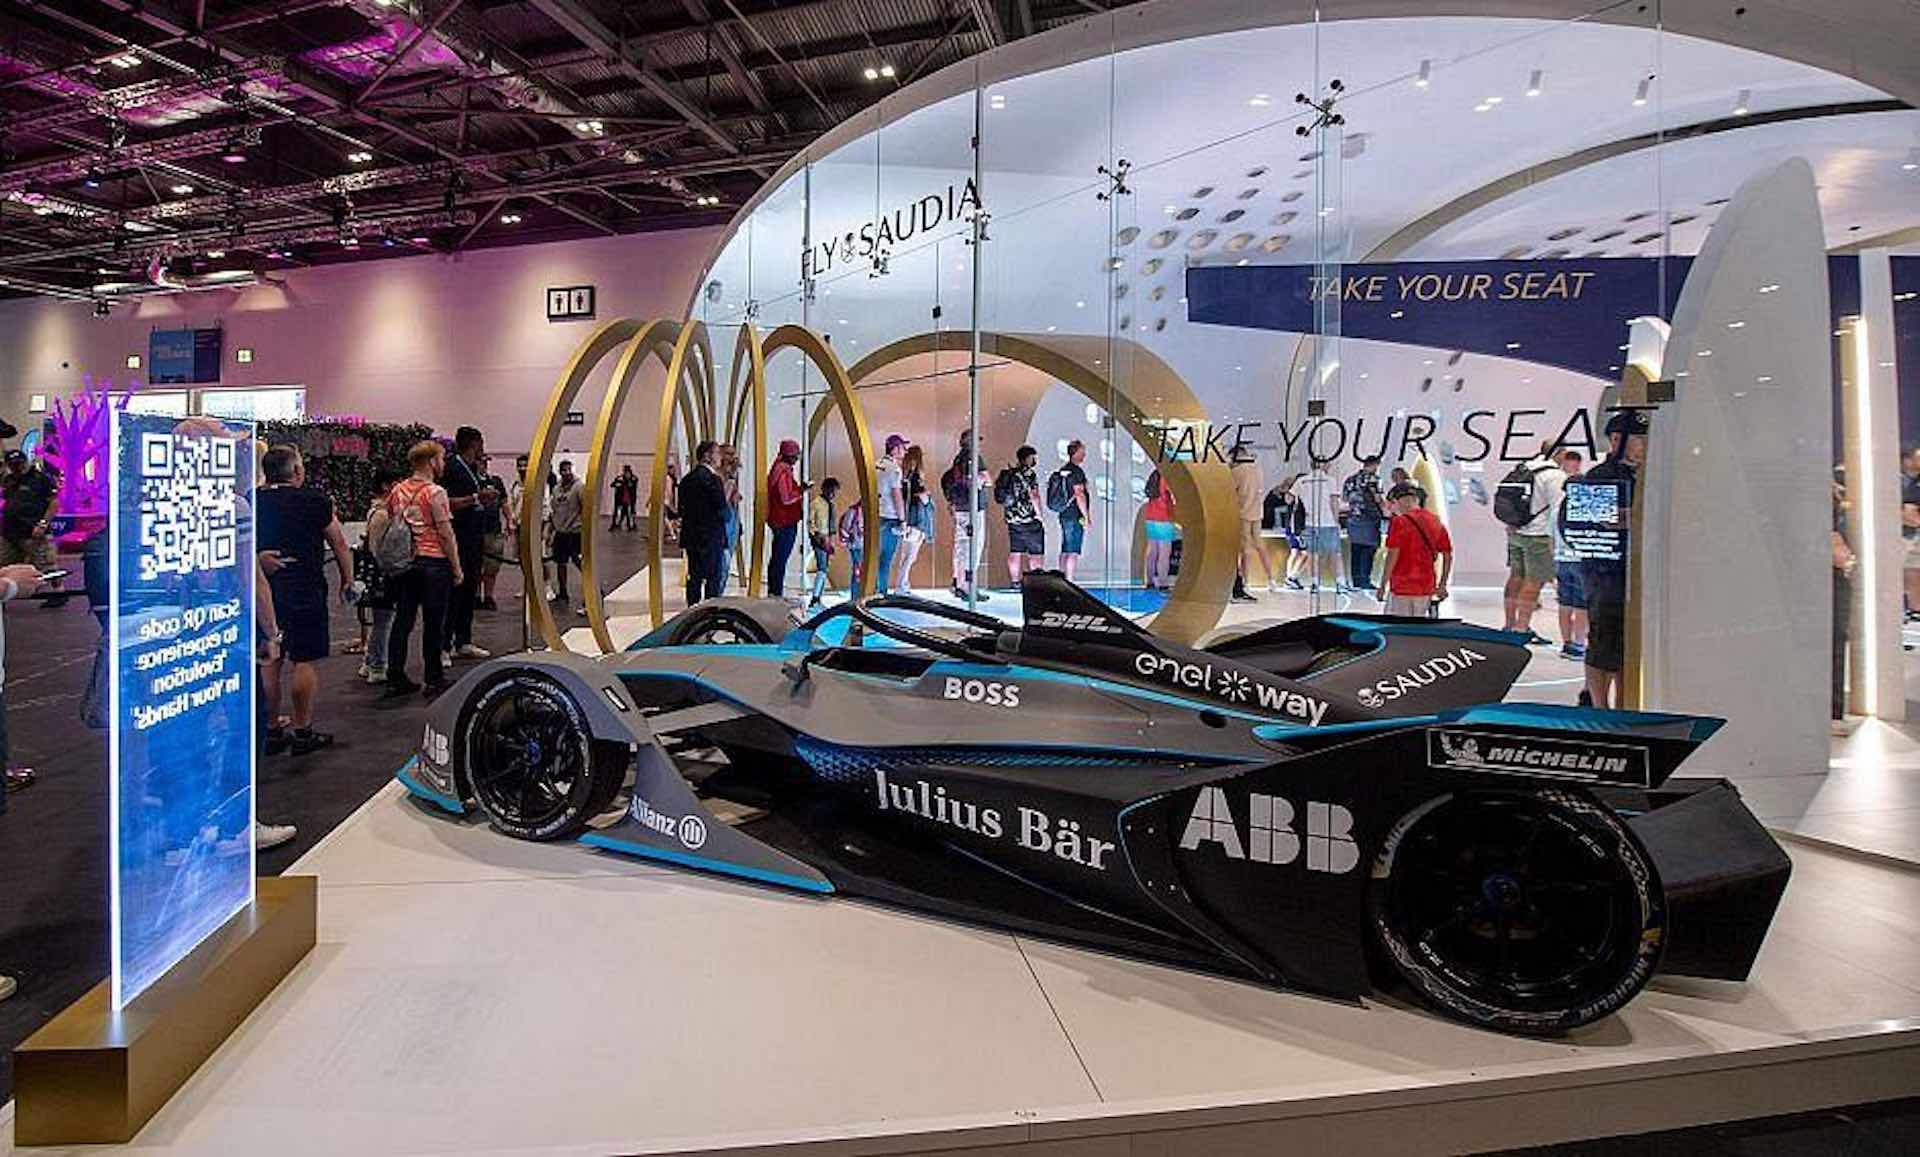 SAUDIA unveils the latest immersive experiences in London